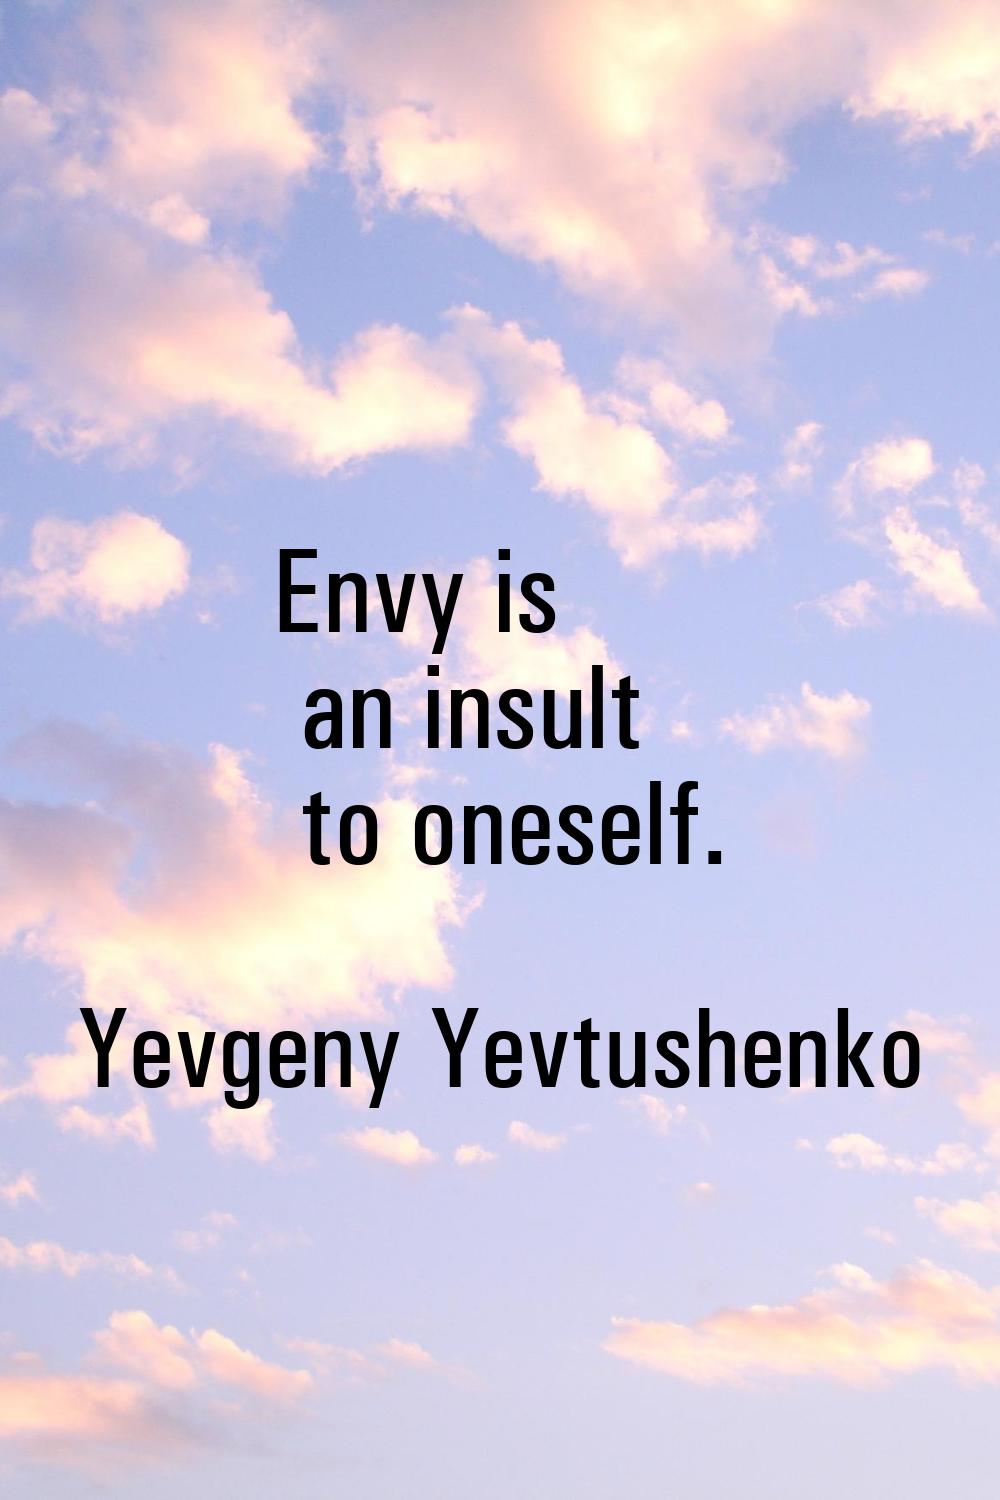 Envy is an insult to oneself.